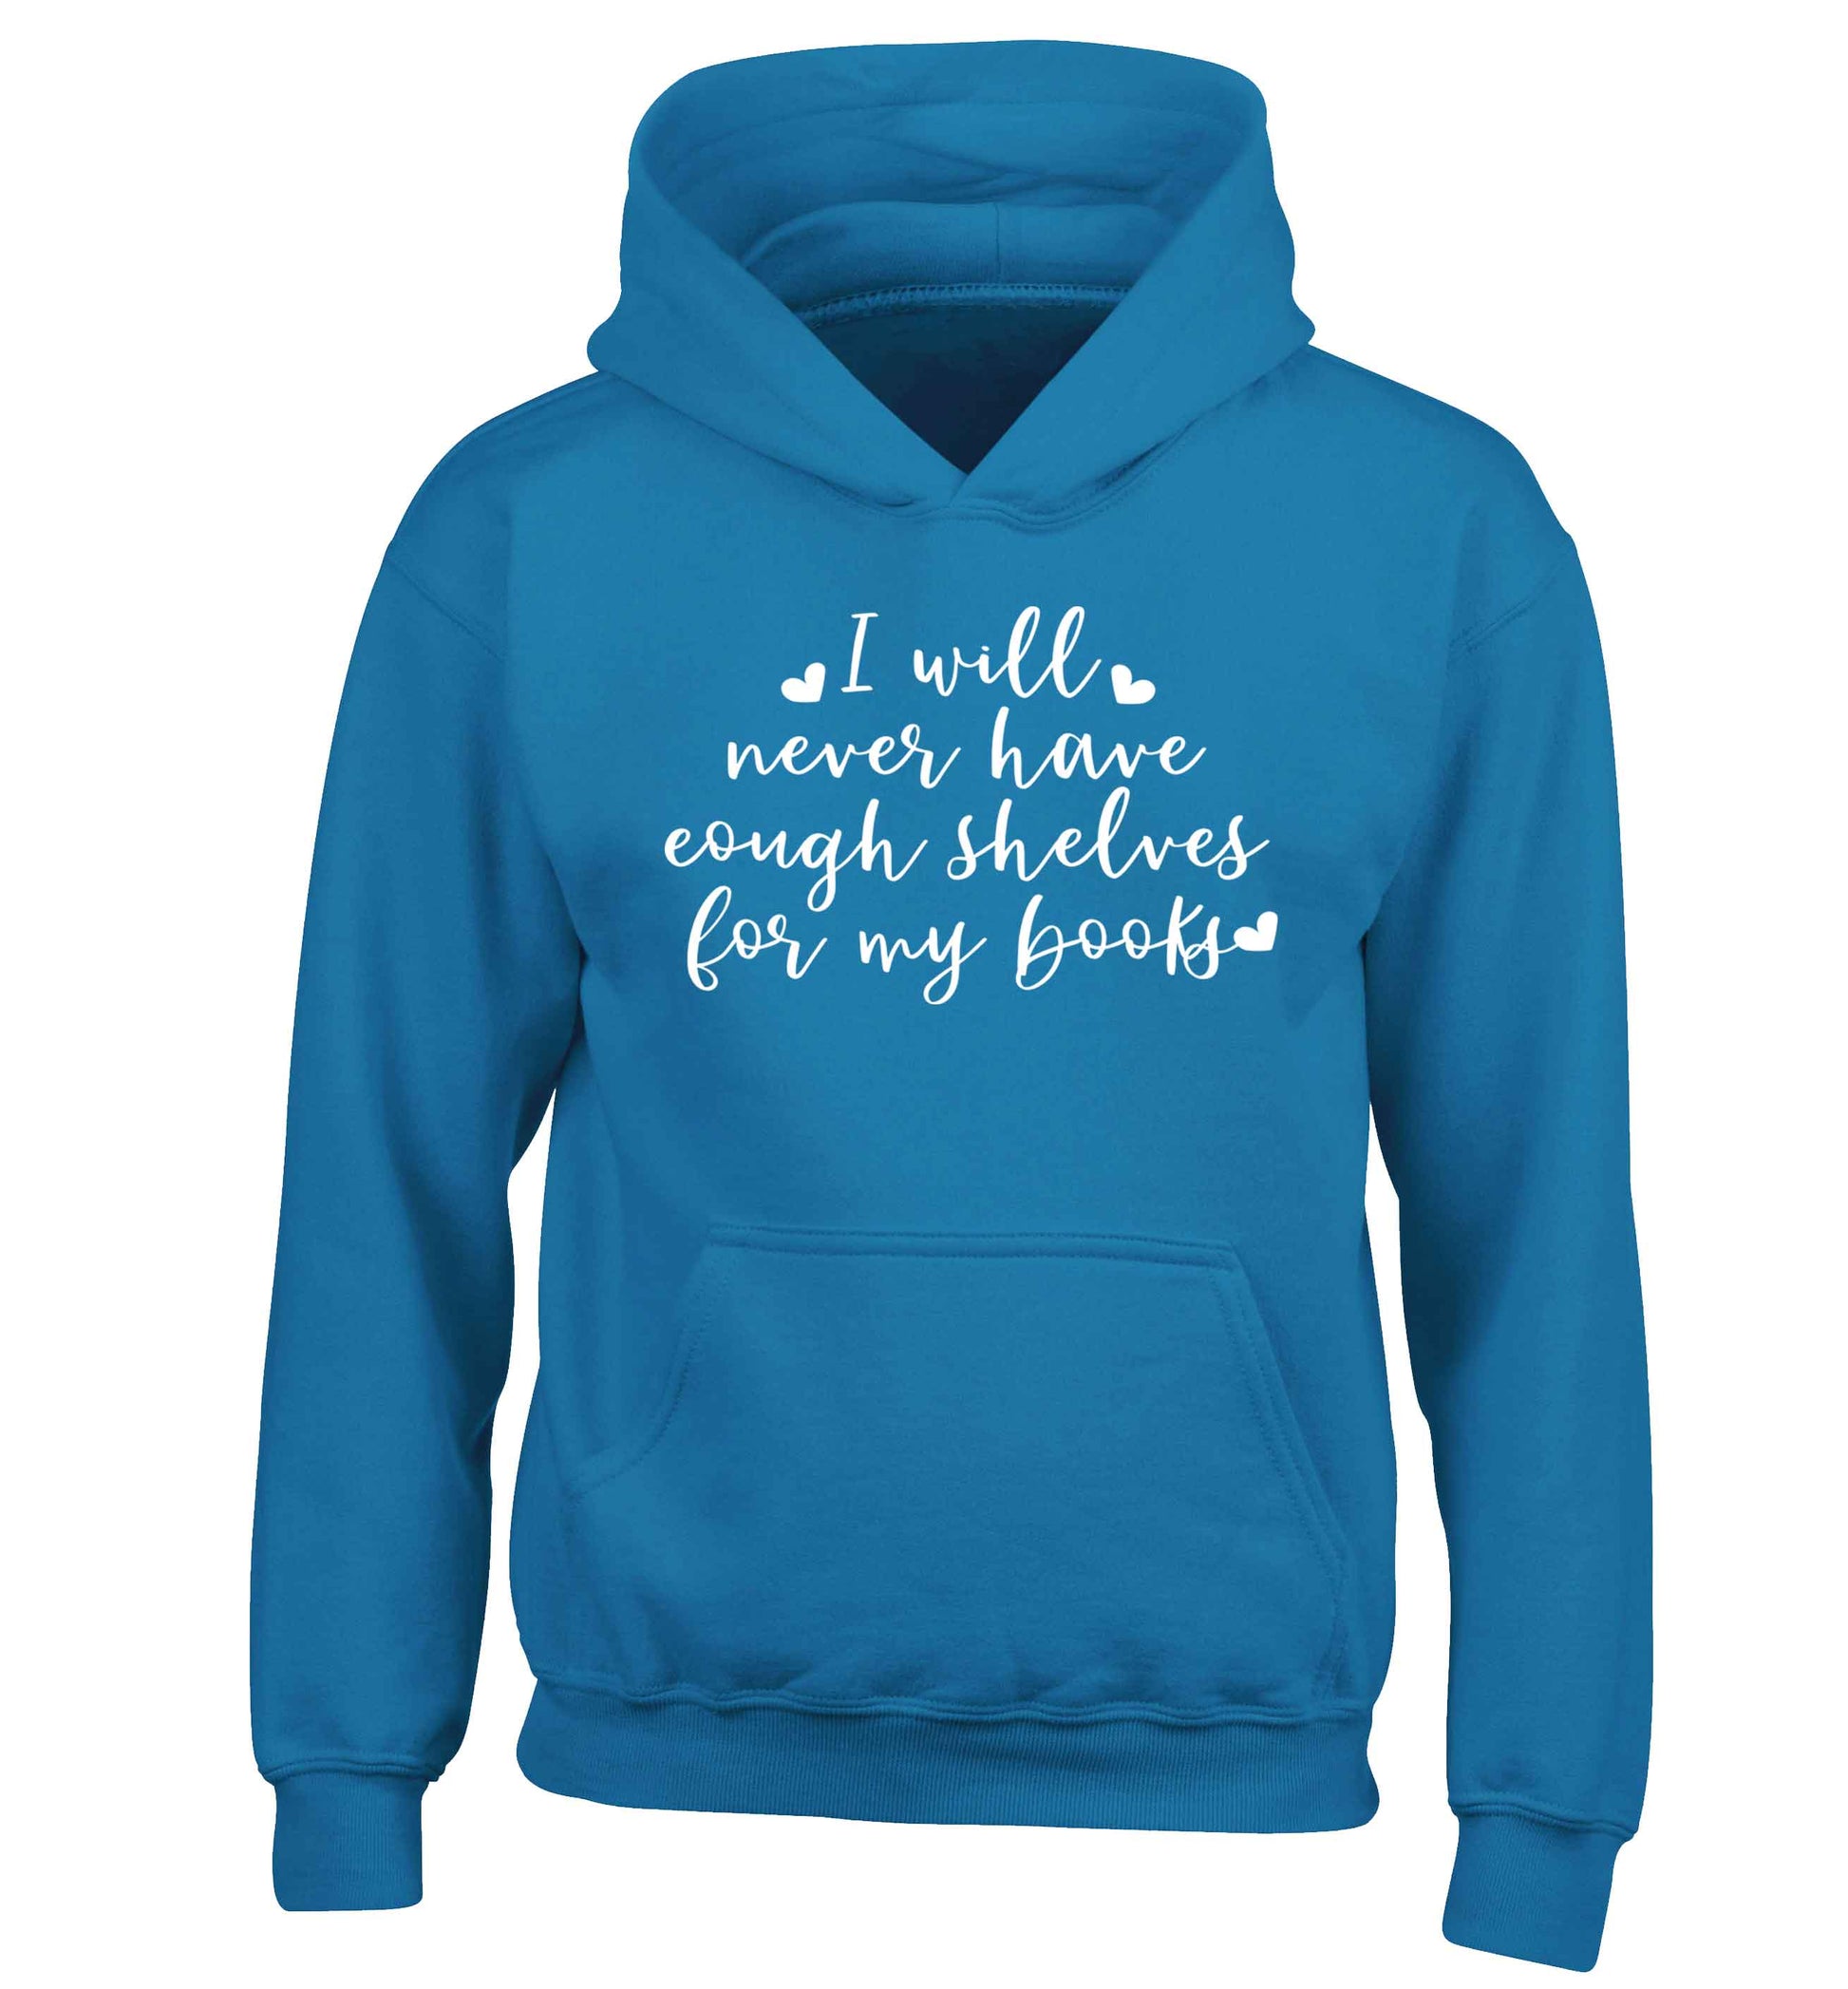 I will never have enough shelves for my books children's blue hoodie 12-13 Years